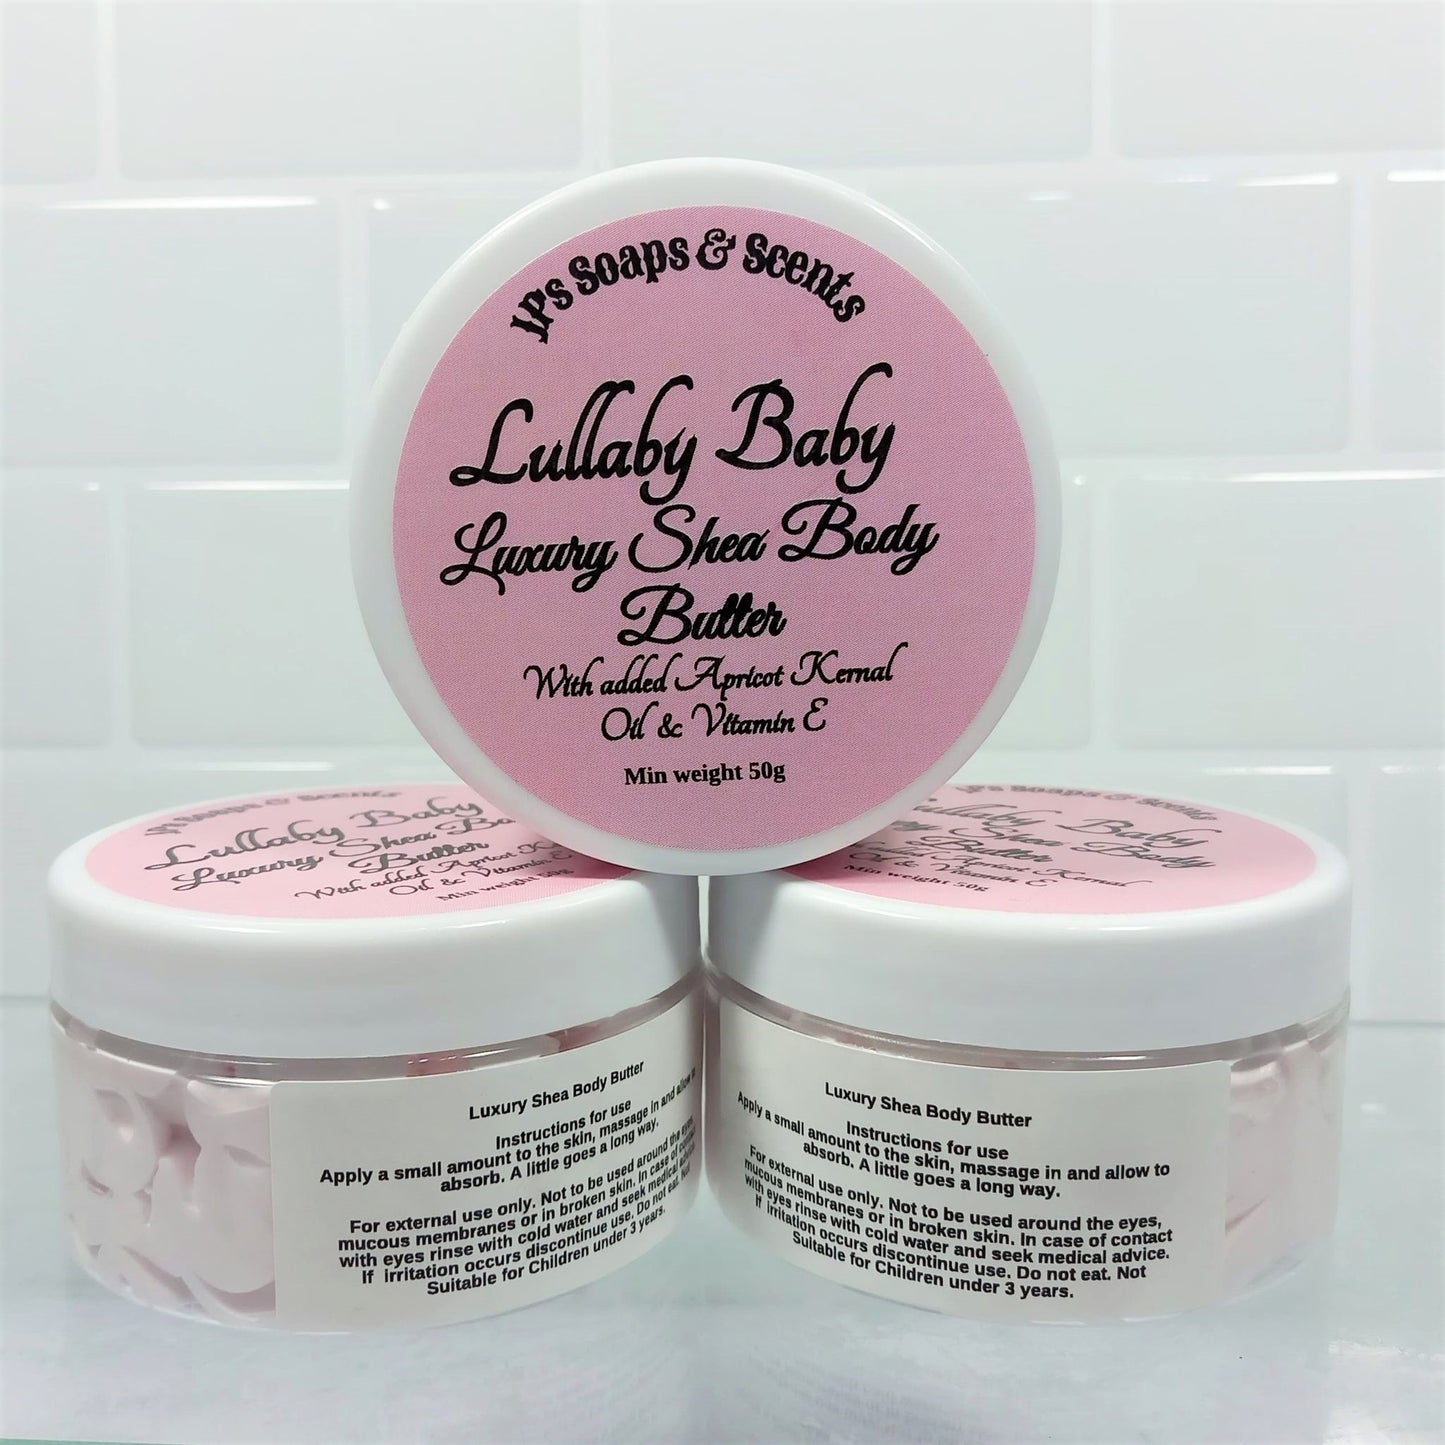 whipped-body-butter